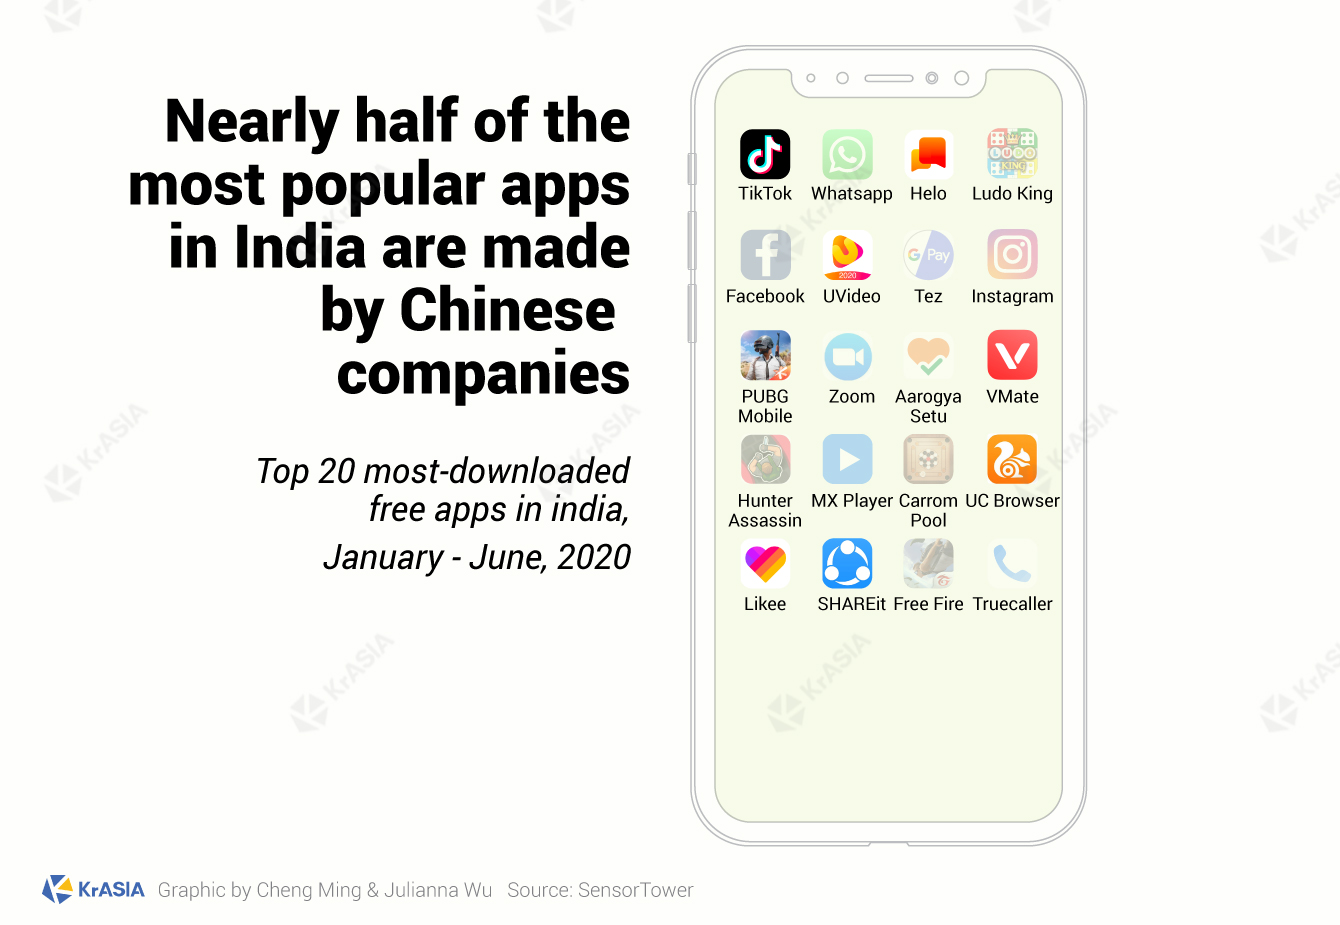 Top 20 most-downloaded free apps in India, 2020